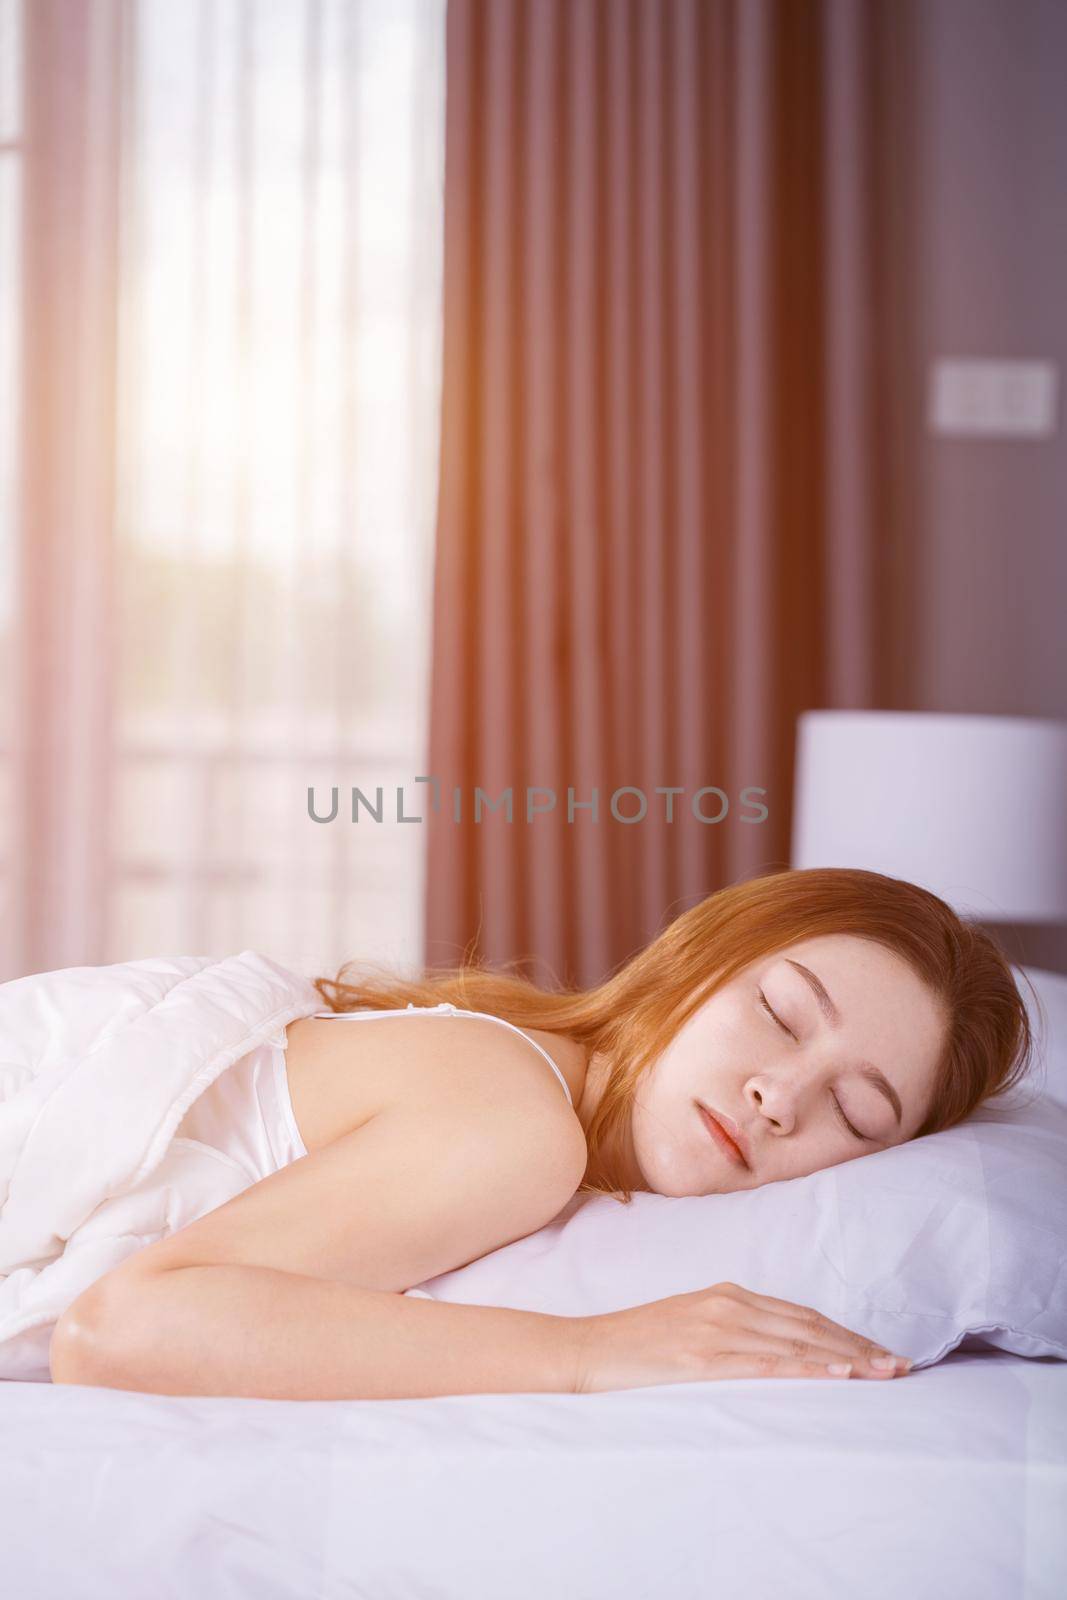 Woman sleeping on bed in bedroom with soft light